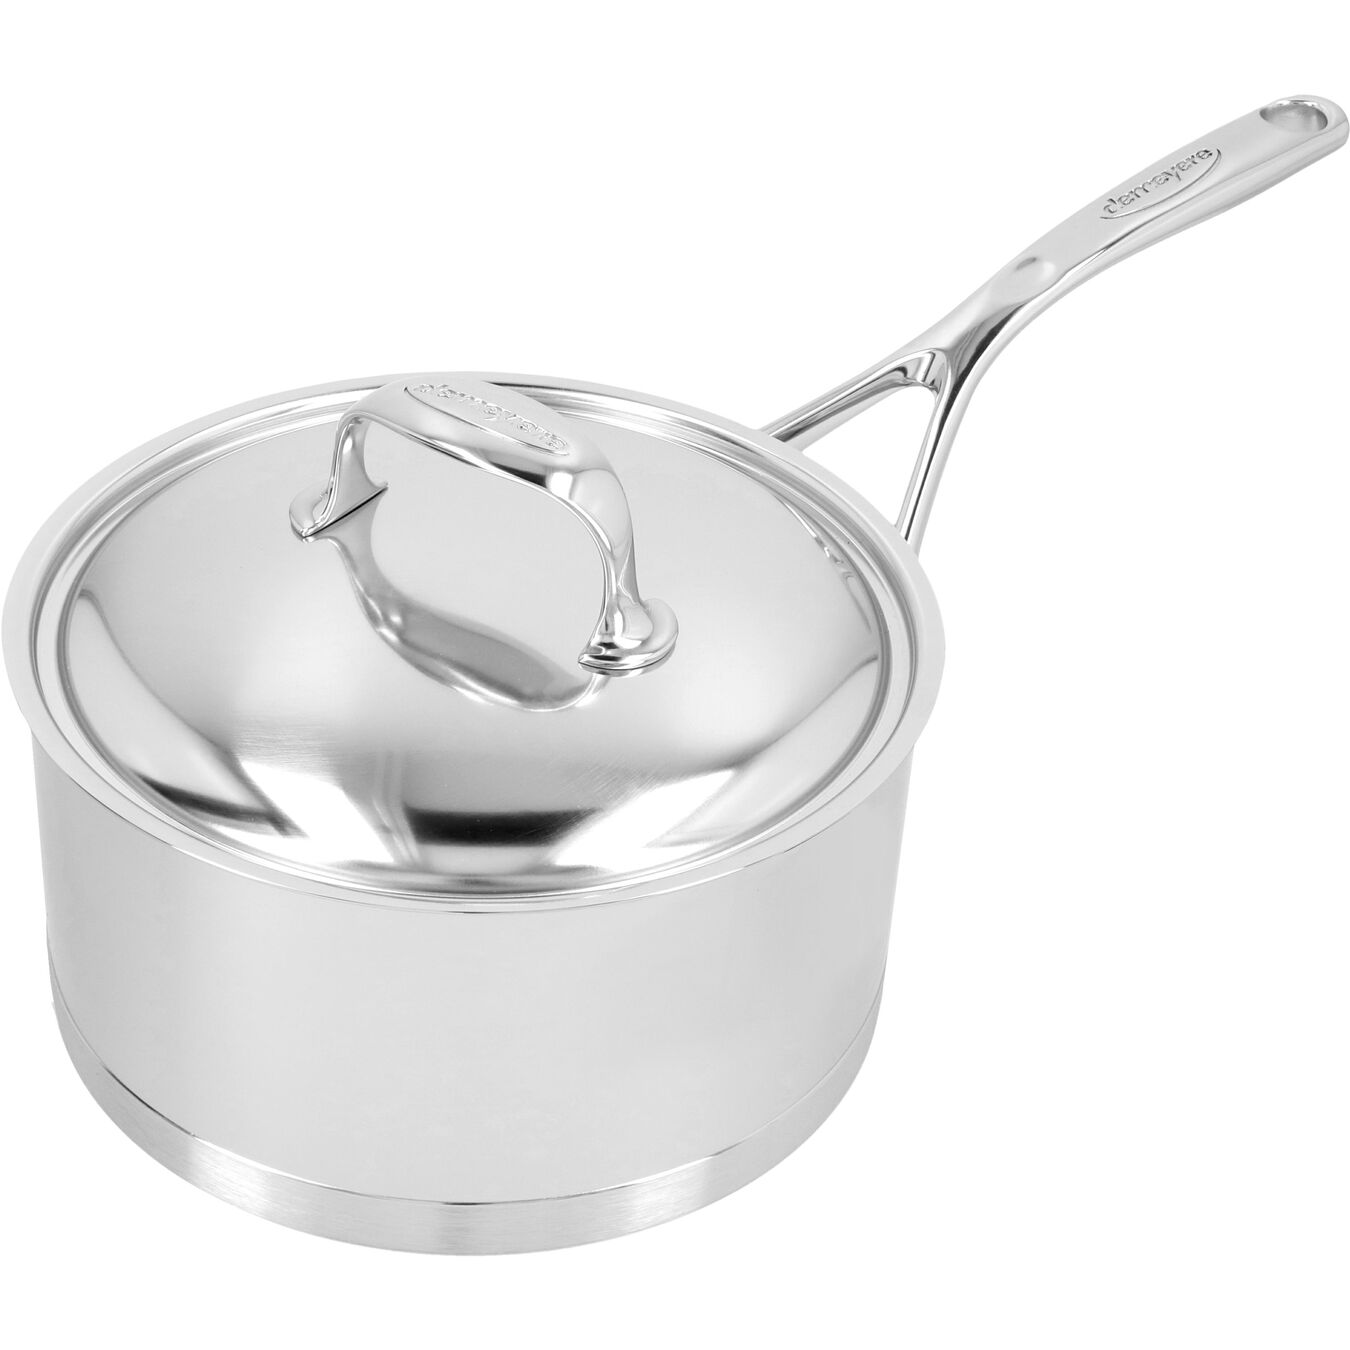 Demeyere Atlantis 7 Collection 3L 18/10 Stainless Steel Round Sauce Pan with Lid